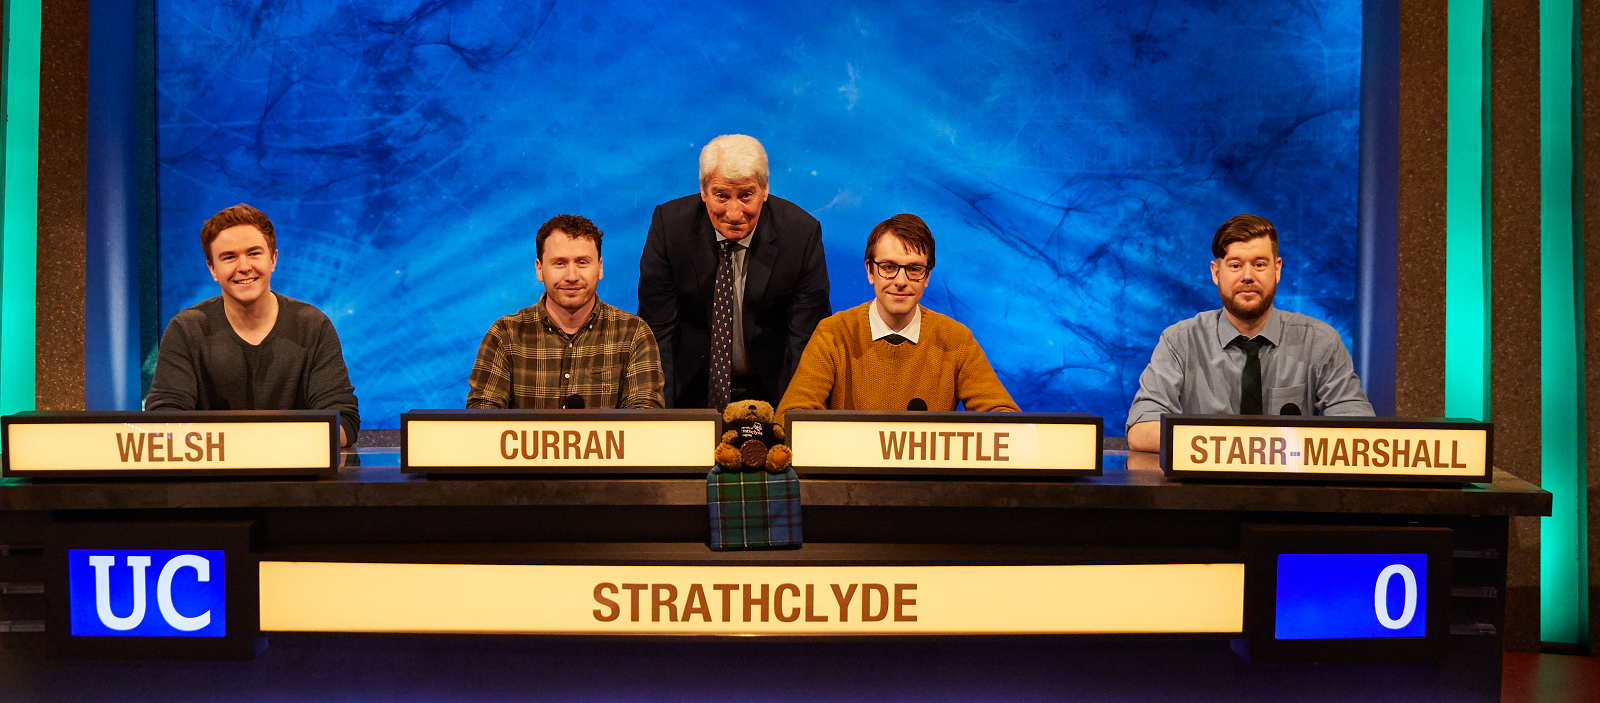 Strathclyde's University Challenge team with host Jeremy Paxman at their first round match  